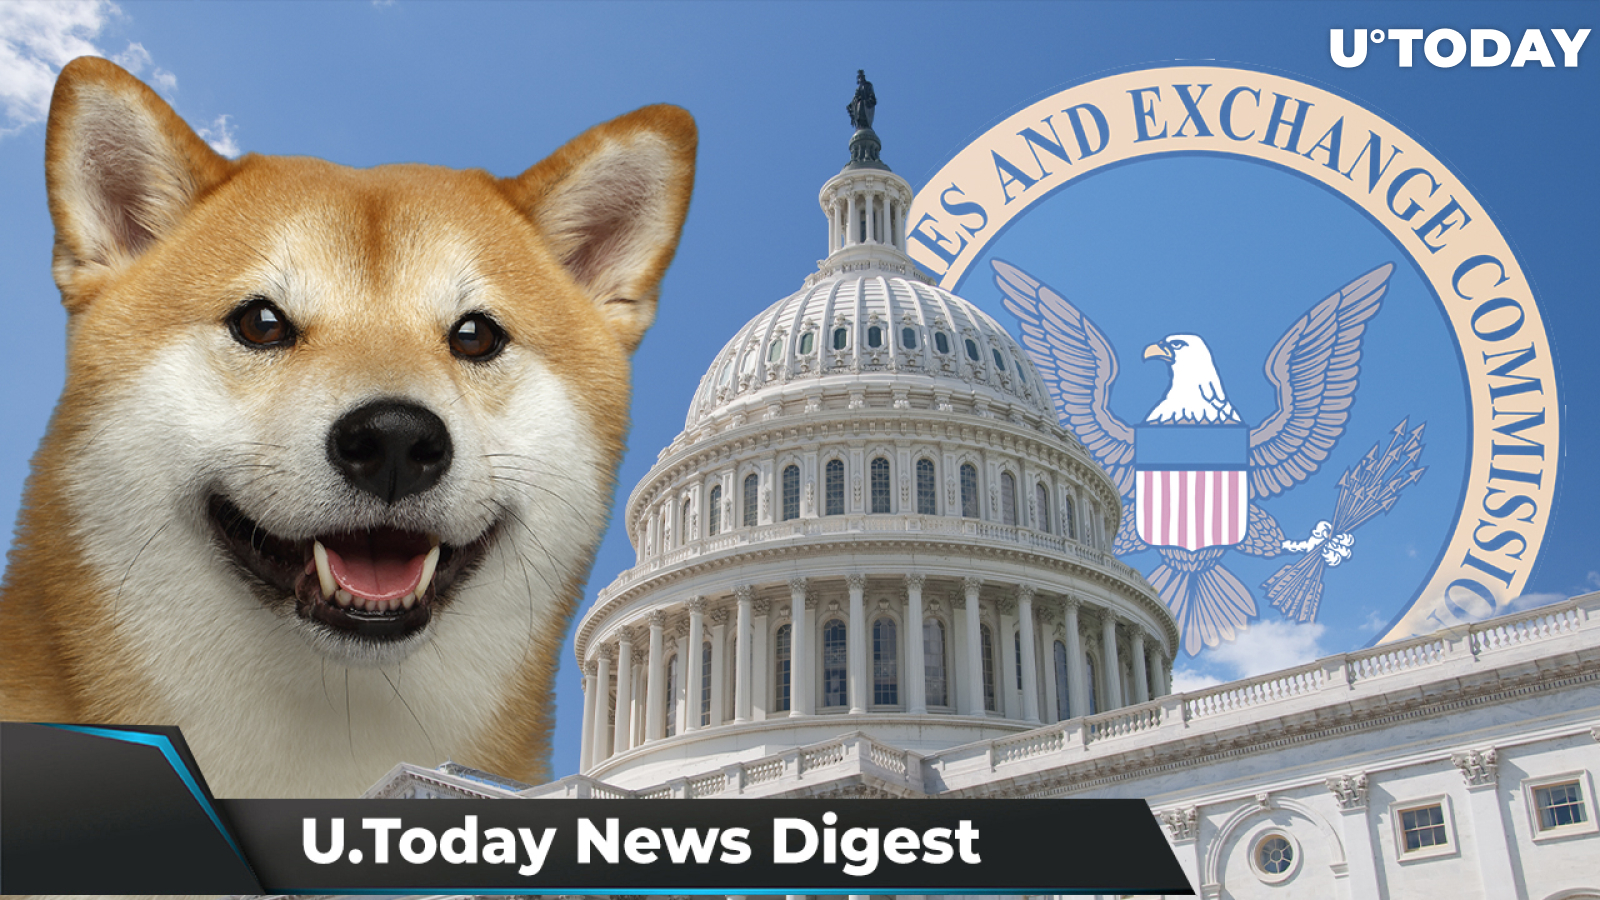 DOGE Creator and Elon Musk Slam US Government, SHIB Has Over 1 Million Holders, SEC Commissioner to Resign in January: Crypto News Digest by U.Today